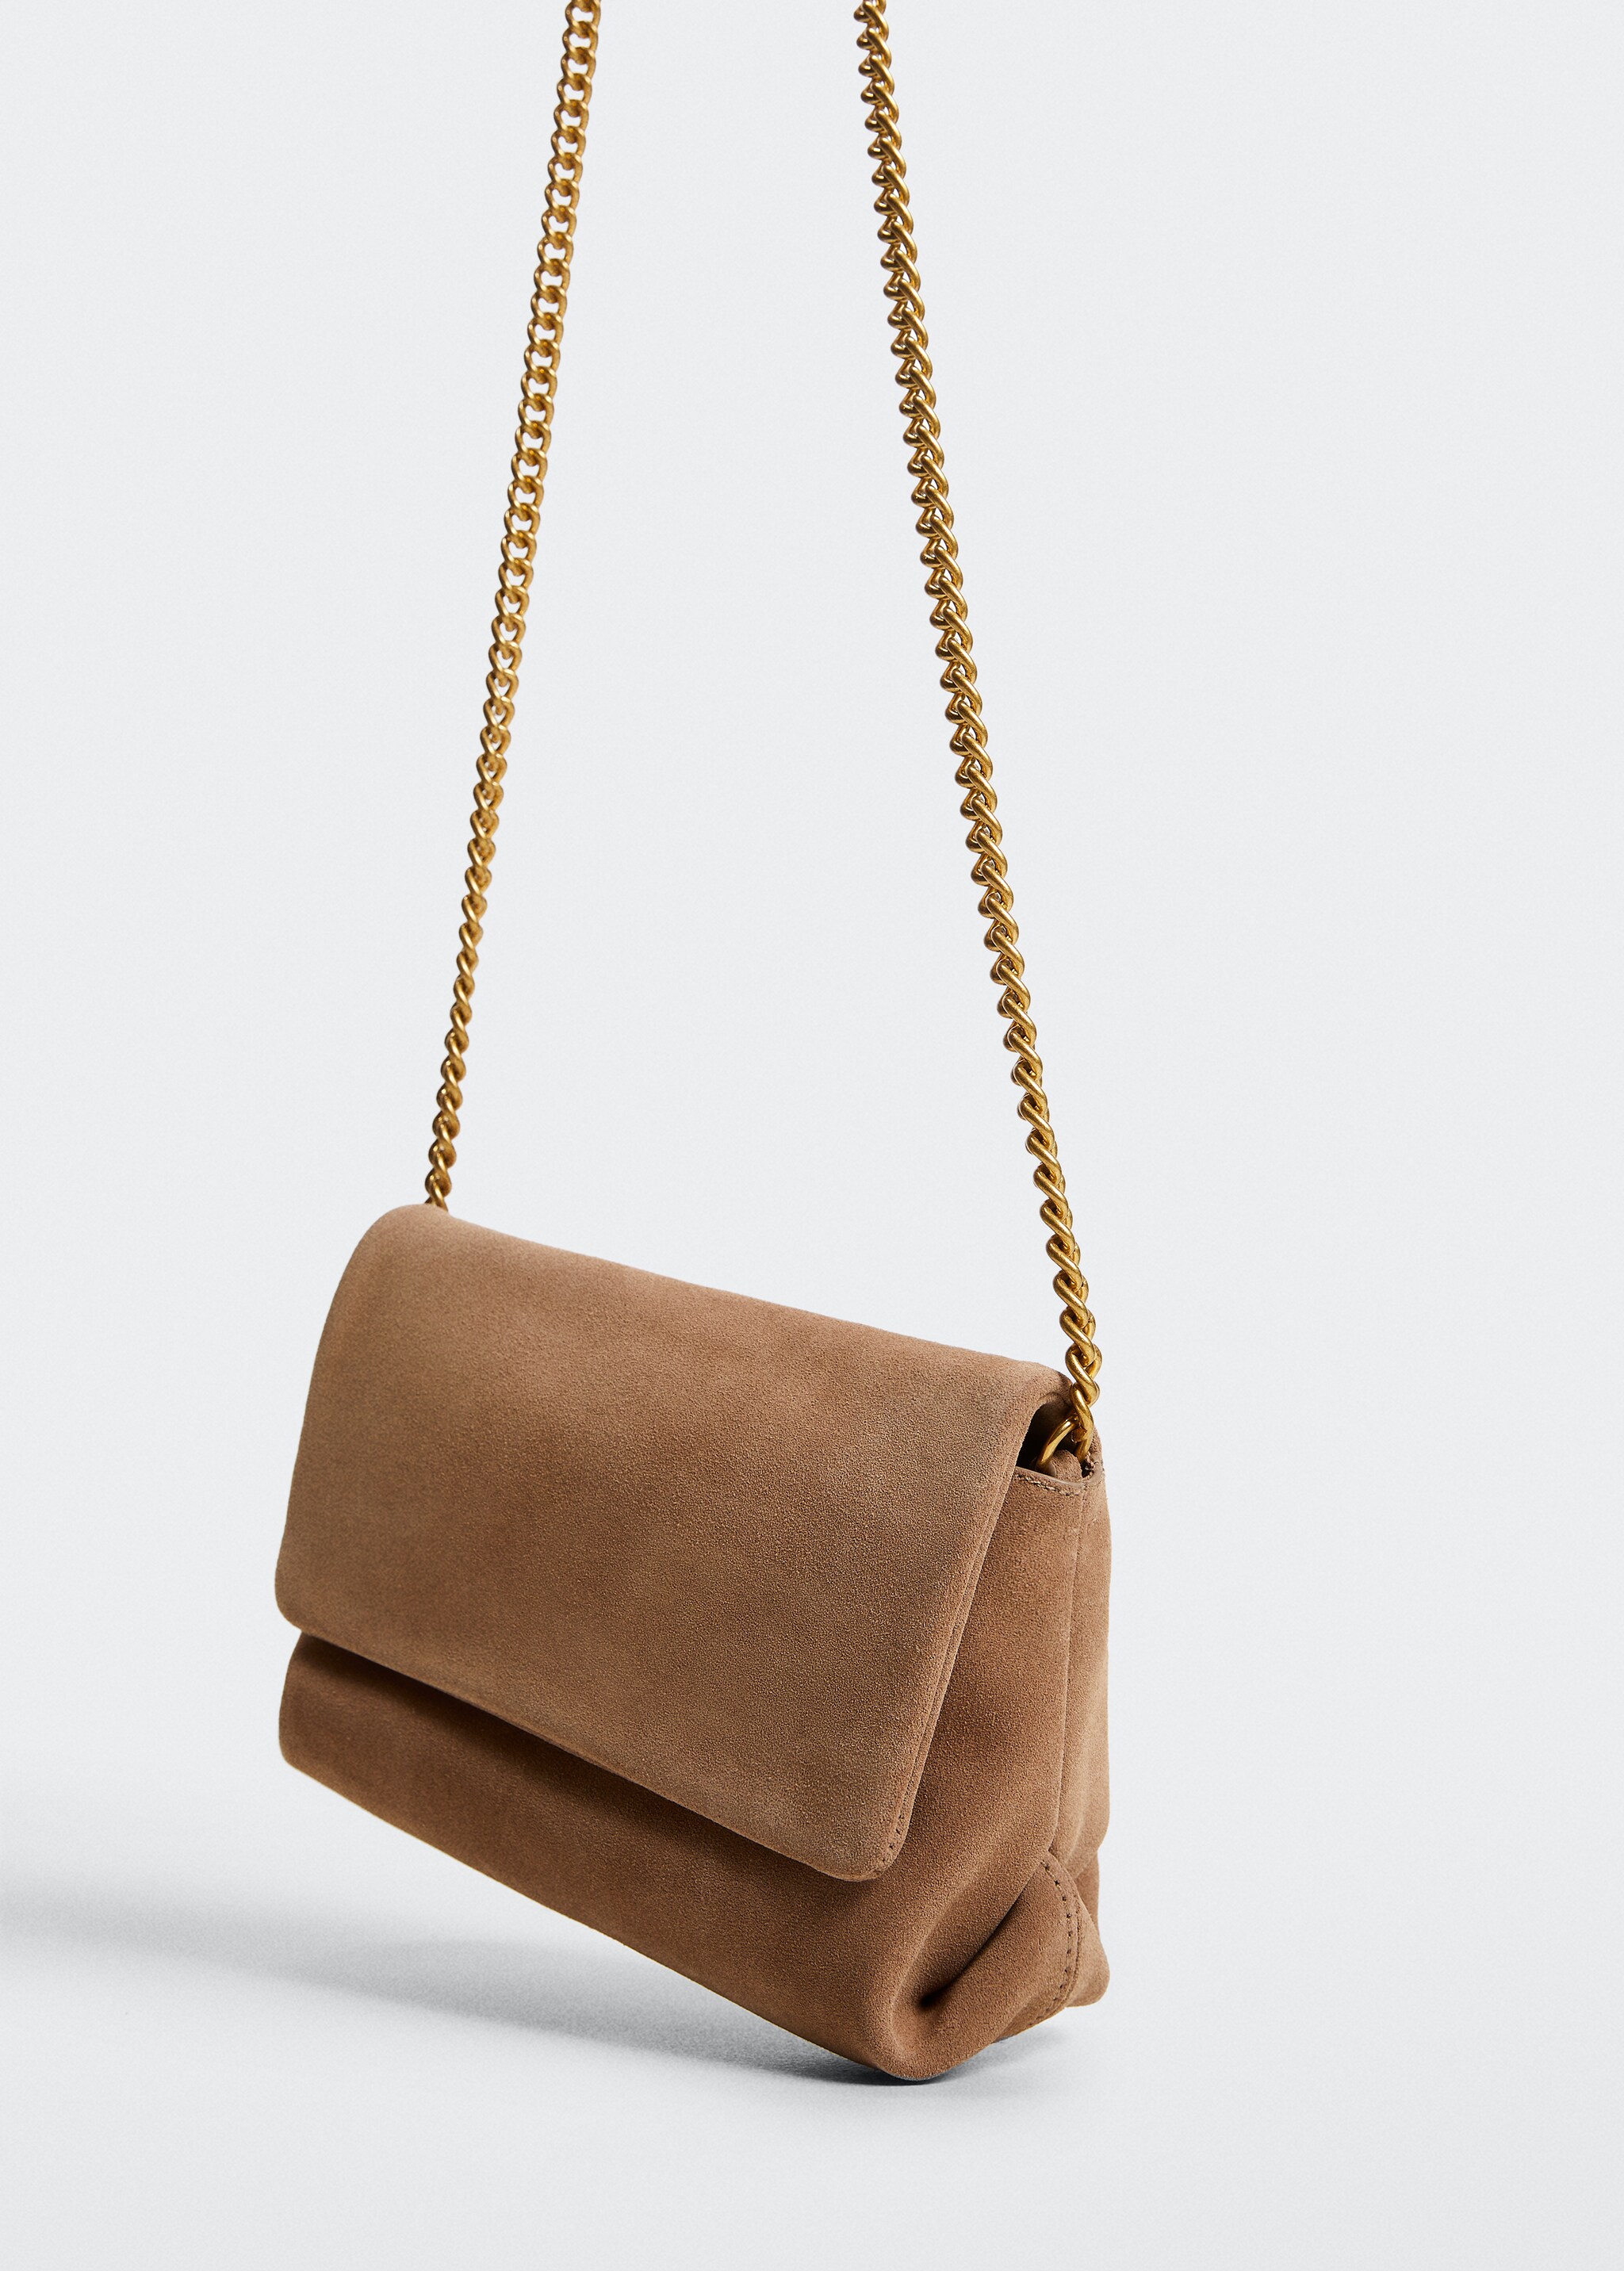 Chain leather bag - Details of the article 2